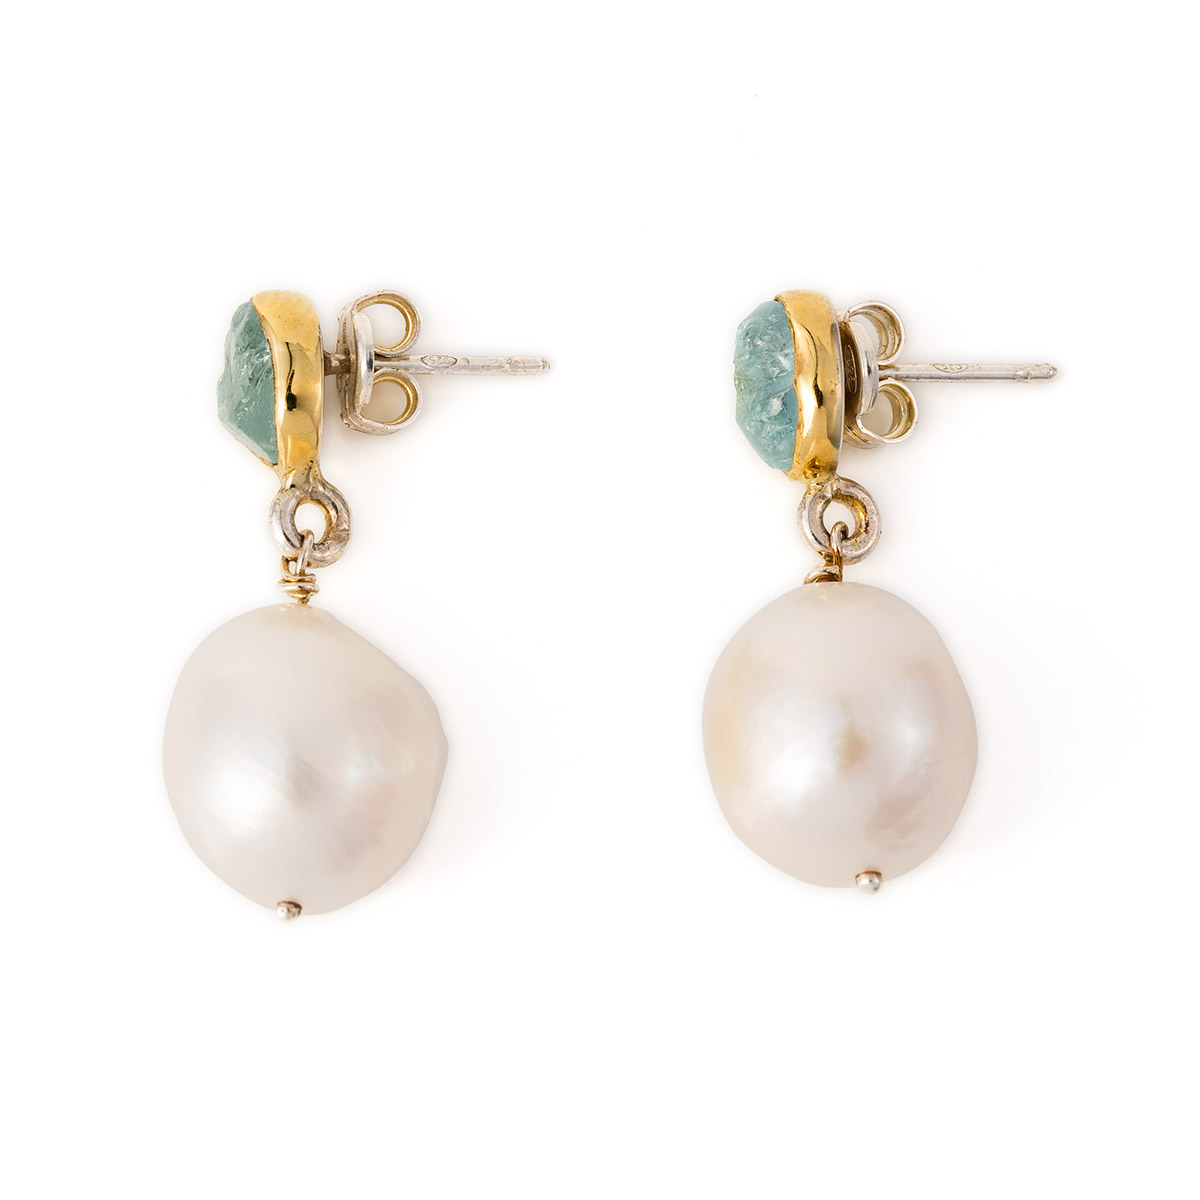 Pearl Dangle Earrings with Aqua Marine - 18K Gold and Sterling Silver